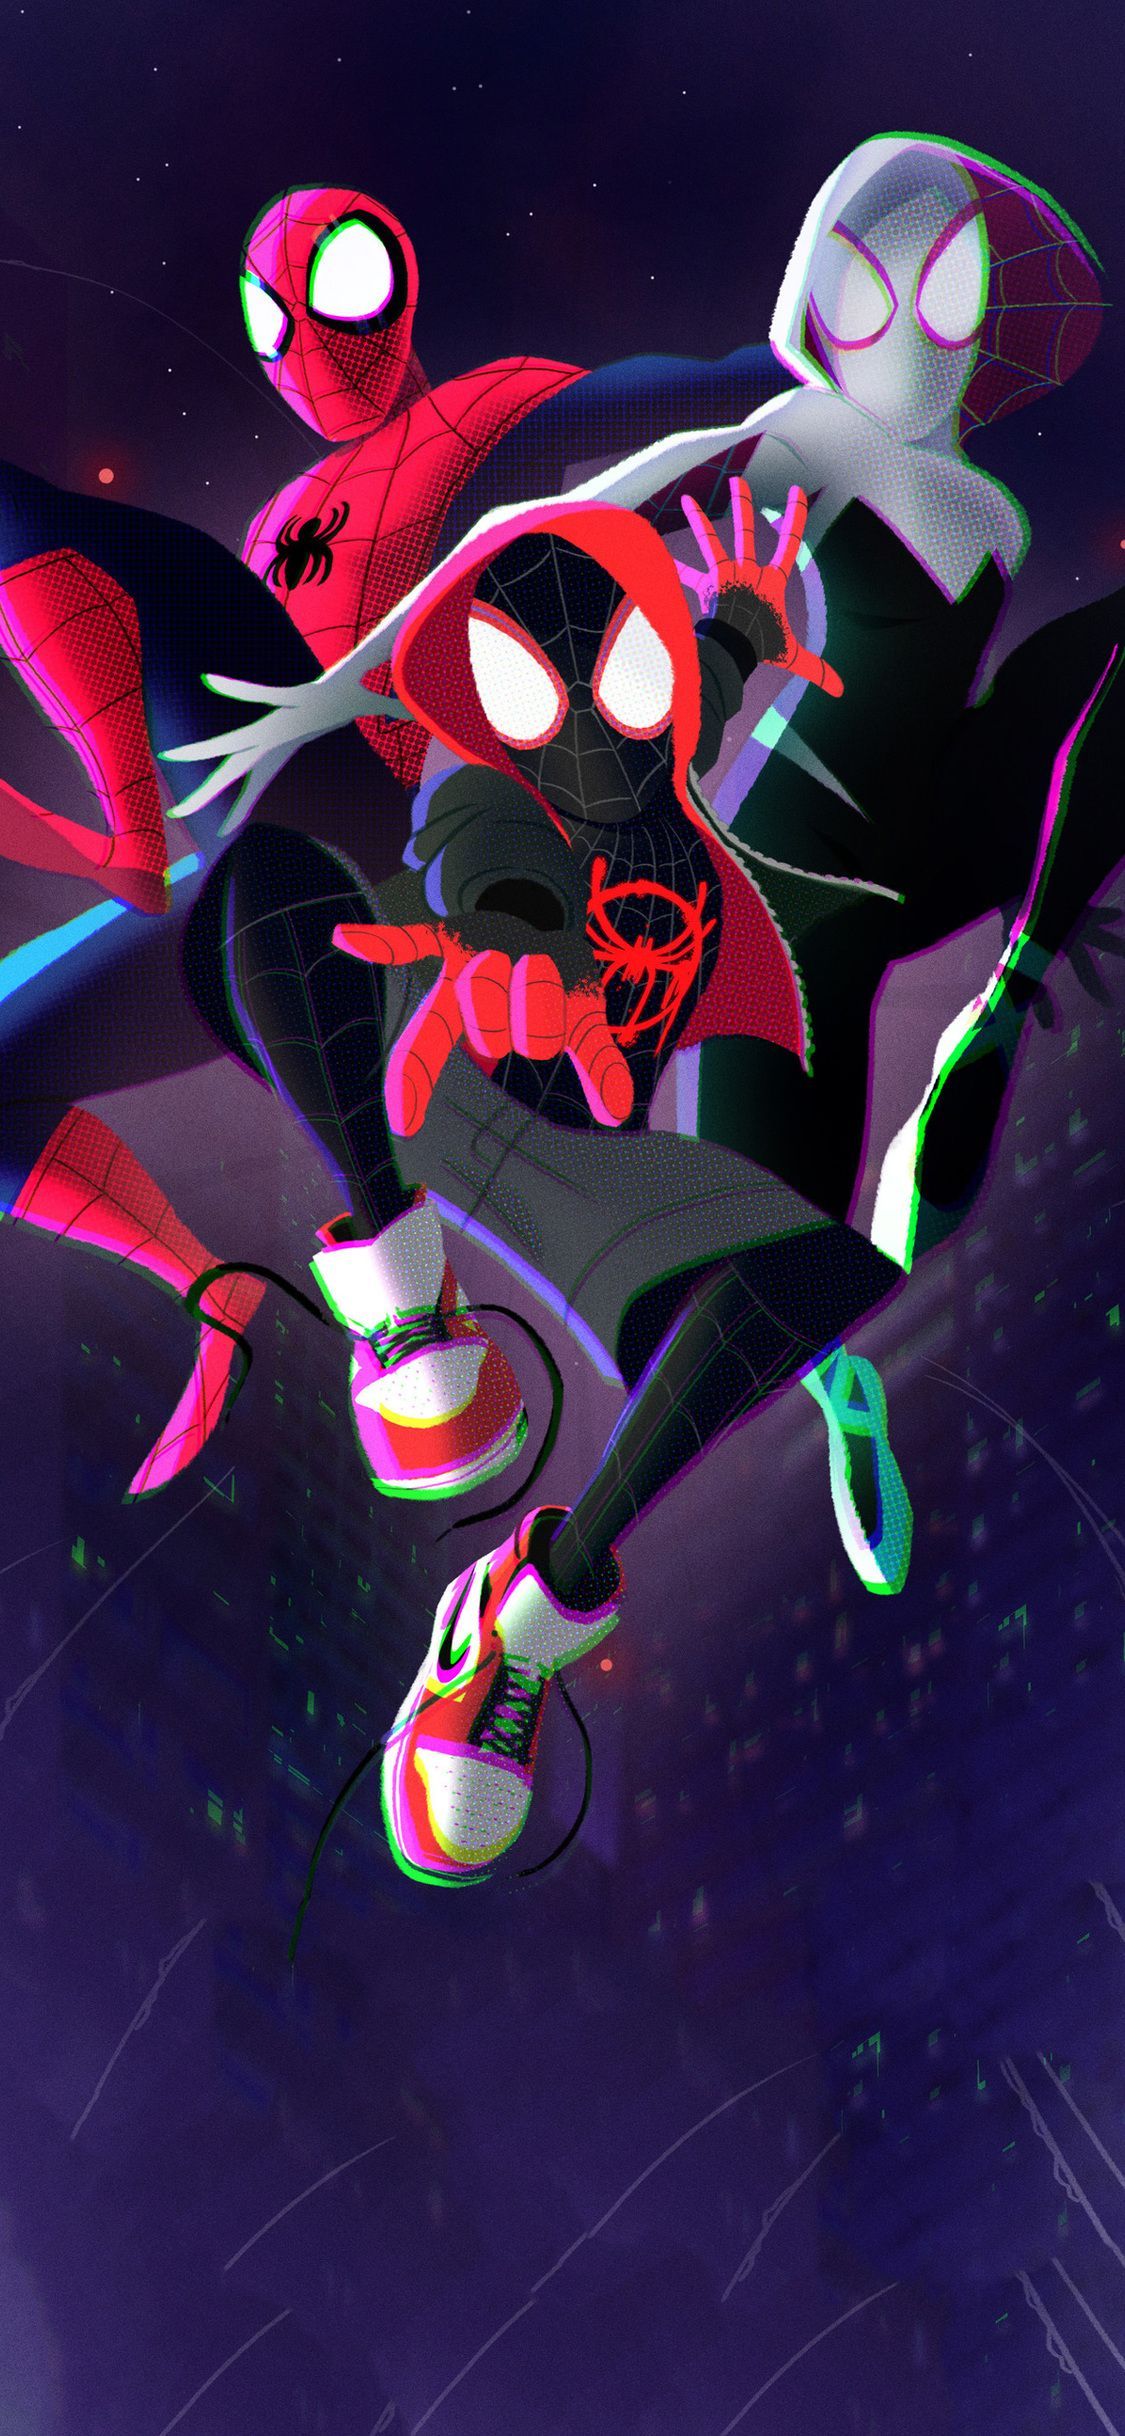 1125x2436 SpiderMan Into The Spider Verse 2018 Art Iphone XS